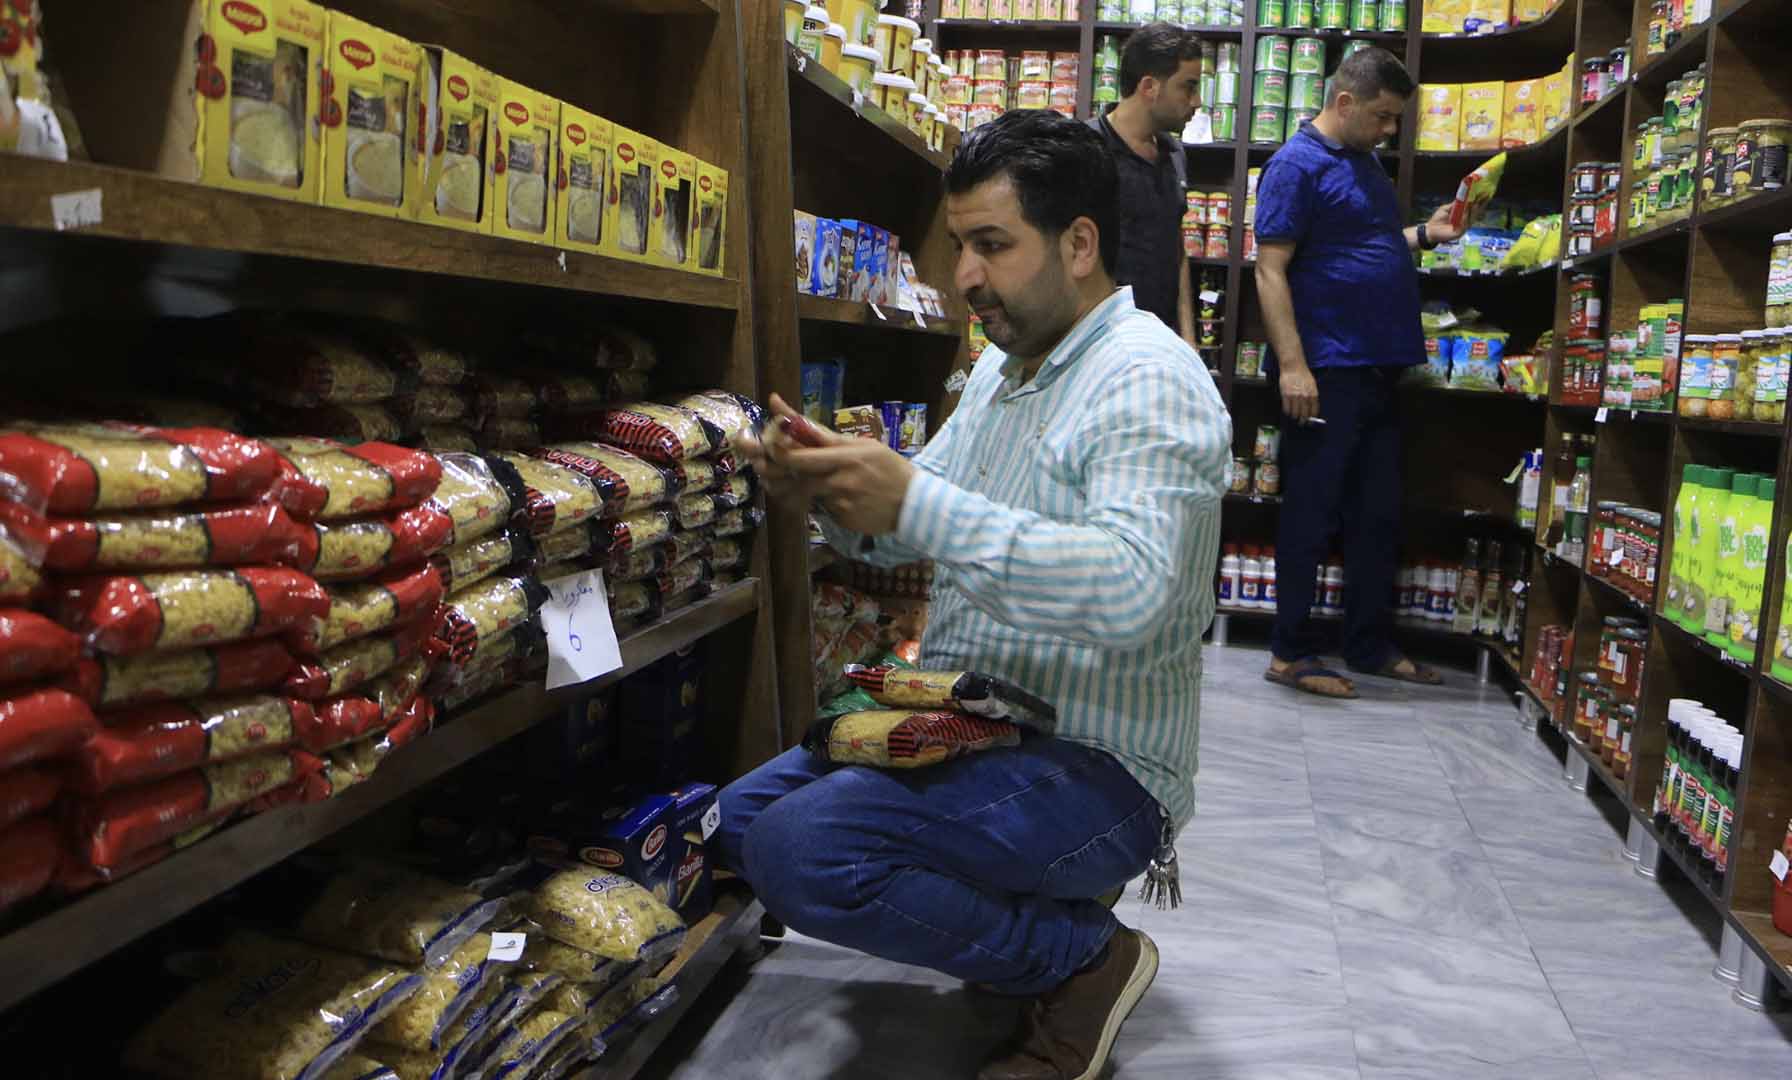  The owner of a small supermarket in Idlib, northwest Syria, is crouched next to shelves in a convenience store and checks the rising price tags on the goods he sells.